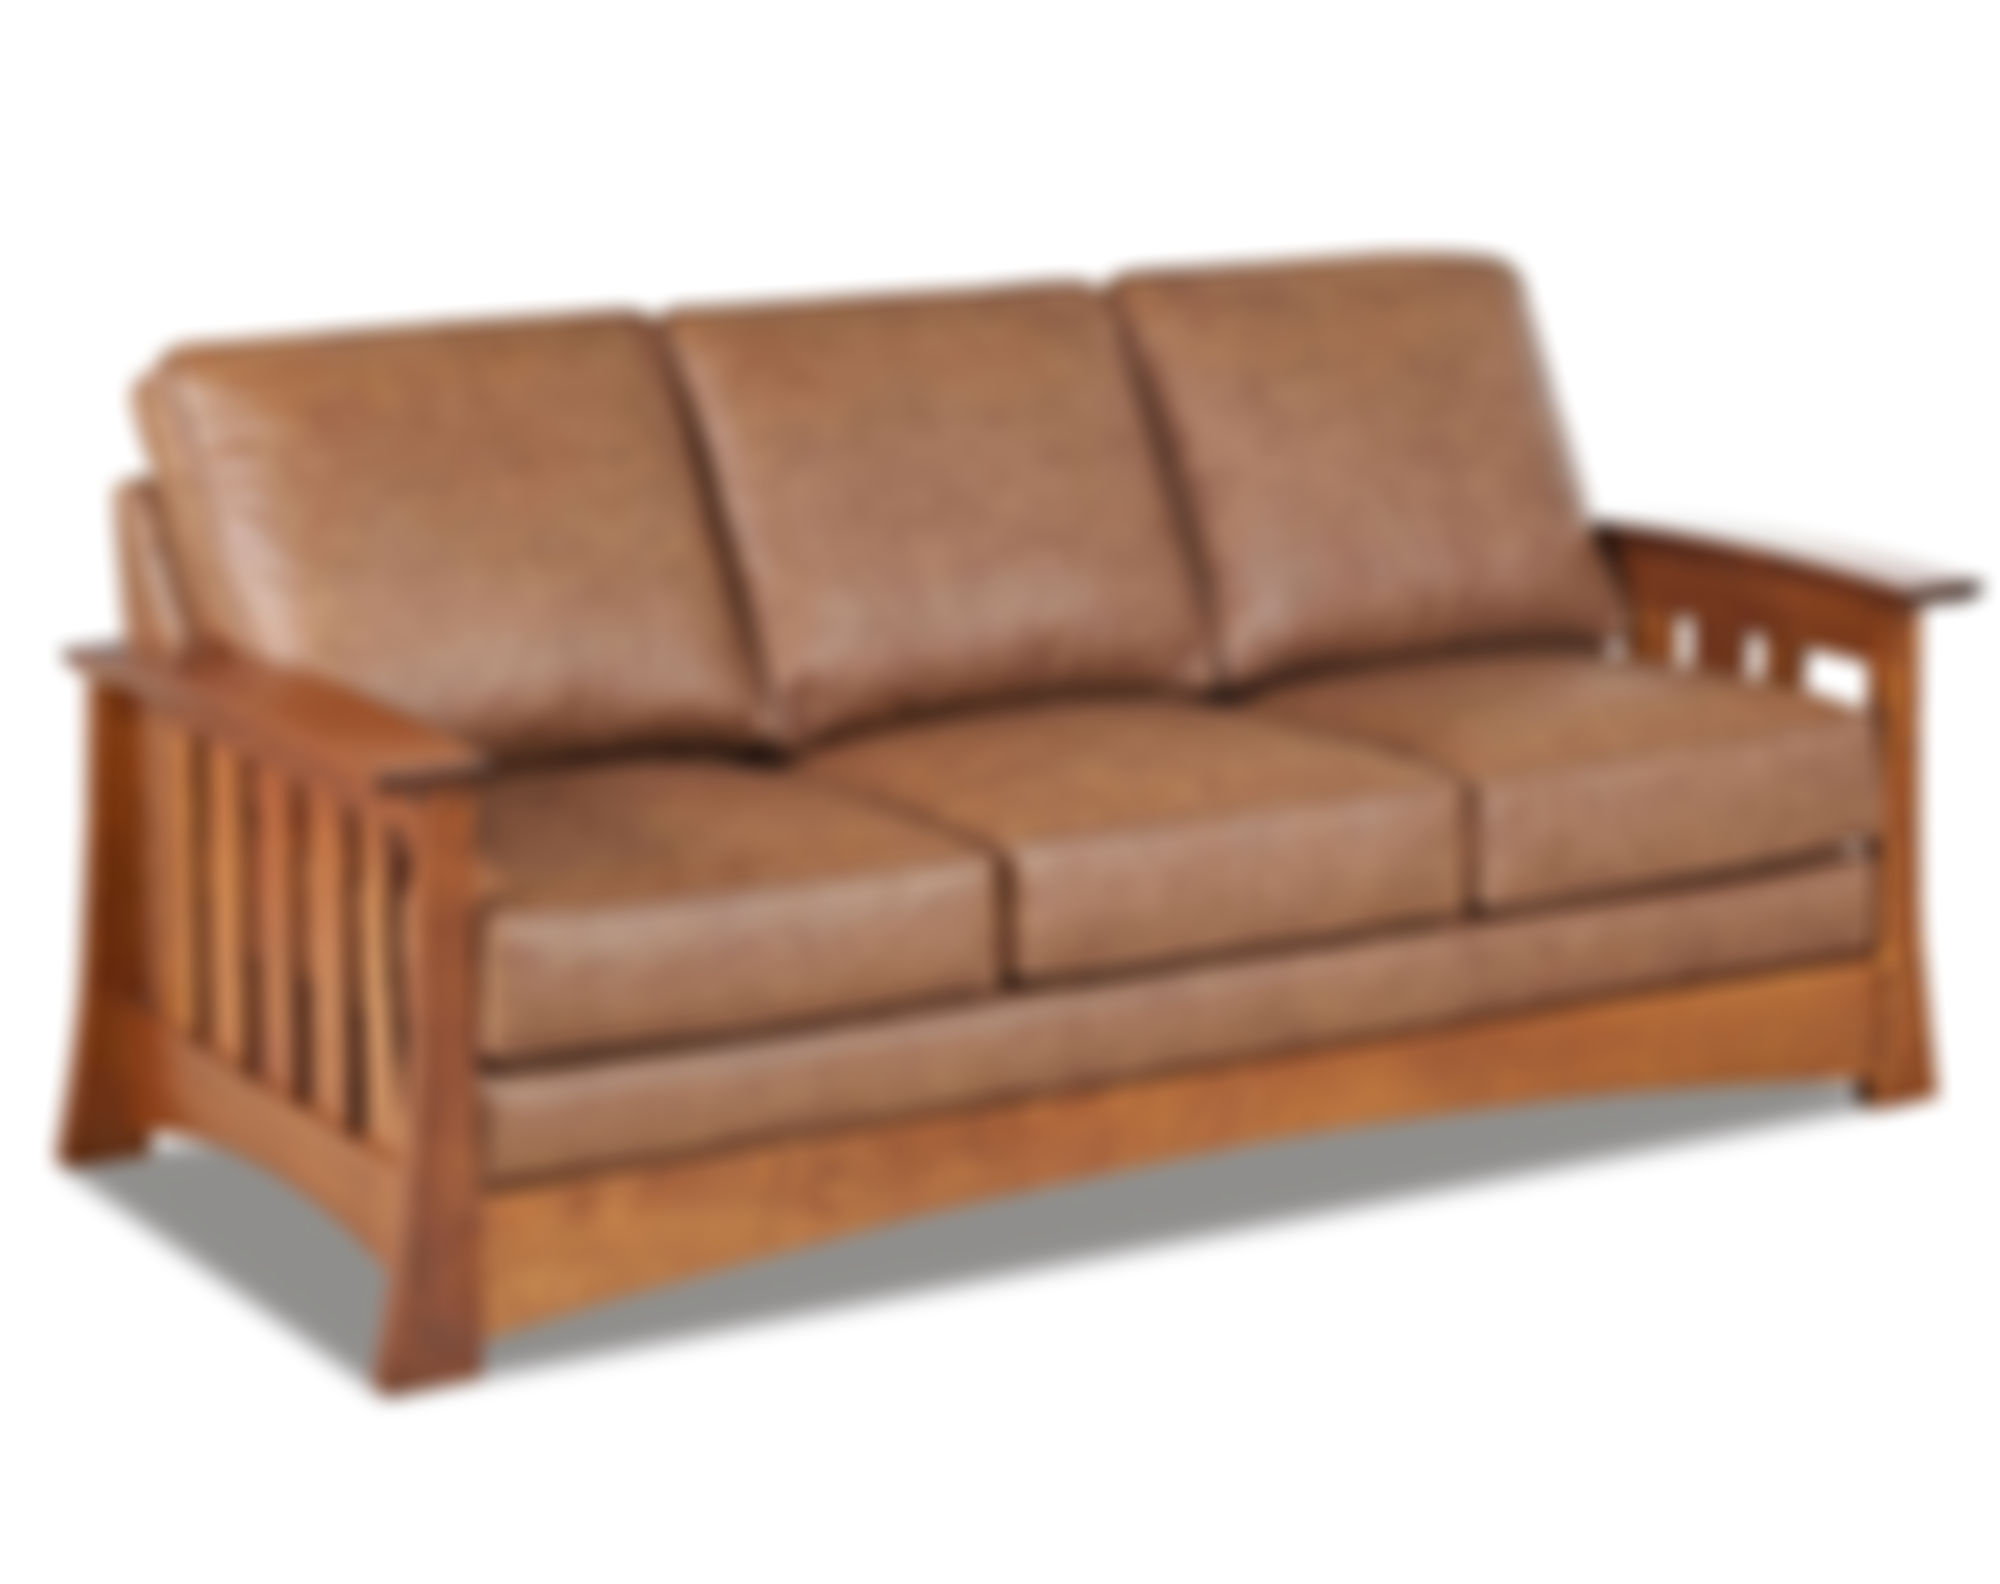 Mission Style Leather Queen Sofas, Craftsman Leather Sofa